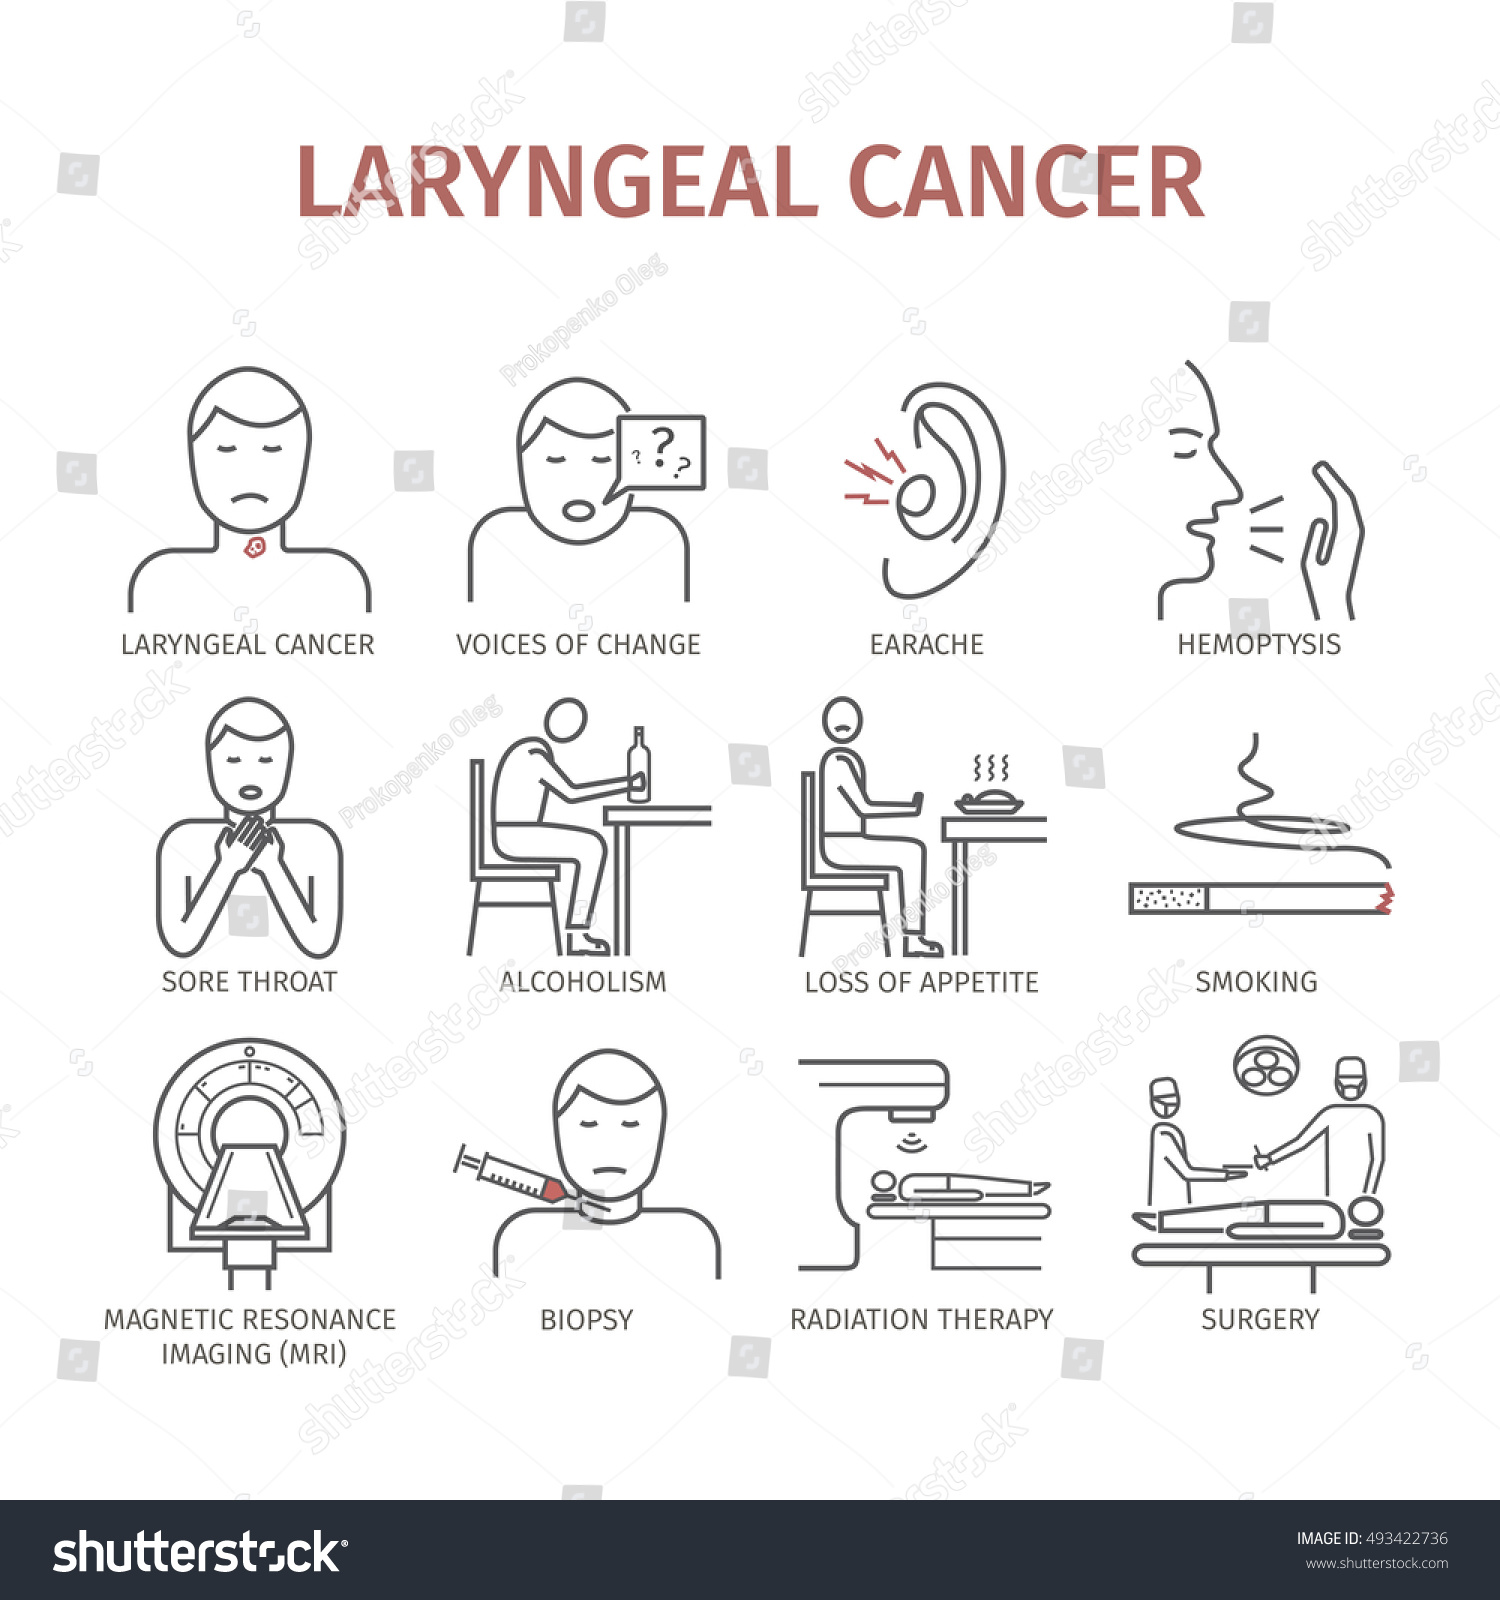 Laryngeal Cancer Symptoms Causes Treatment Line Stock Vector (Royalty Free)  493422736